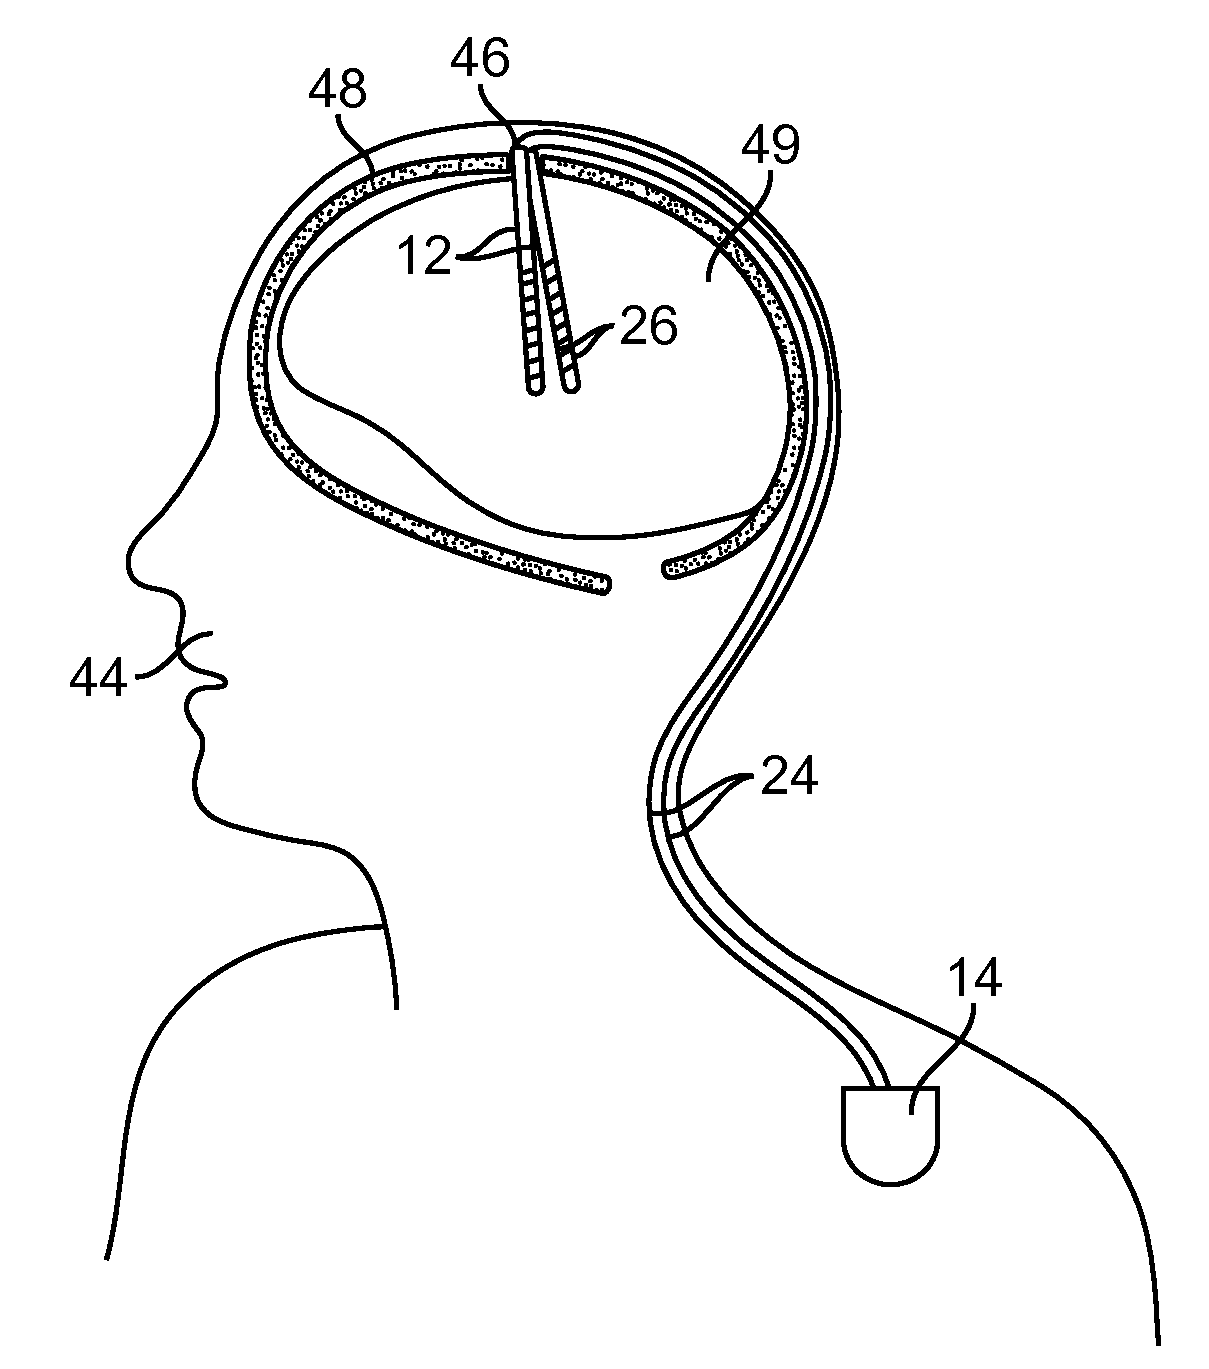 Neurostimulation system for selectively estimating volume of activation and providing therapy